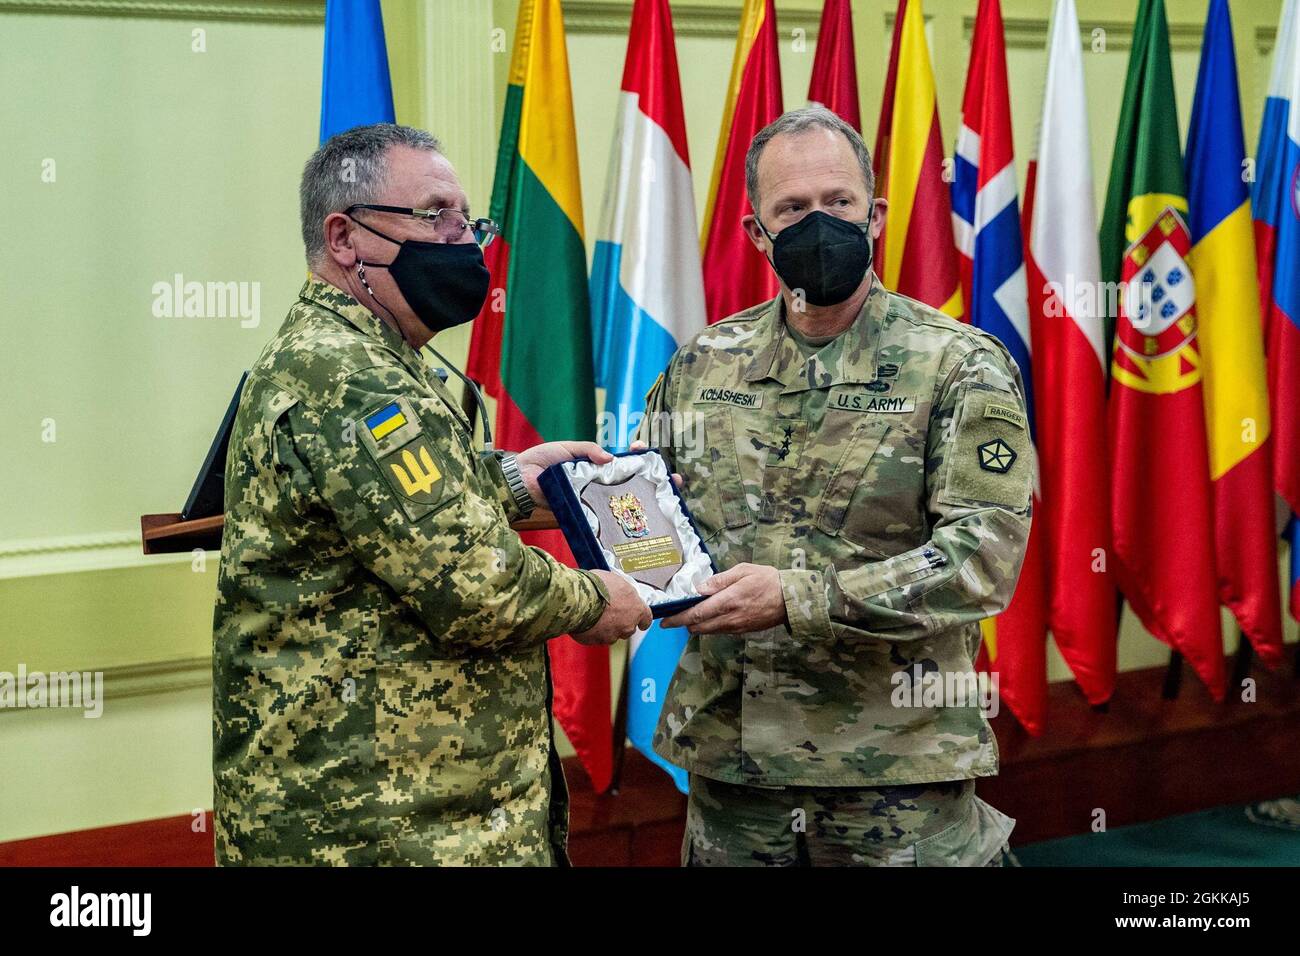 Lt. Gen. John S. Kolasheski, V Corps Commanding General, receives a plaque bestowed by Ukrainian Lt. Gen. Pavlo Tkachuk, the Chief of the Armed Forces Ukraine National Army Academy, May 14, 2021, at the International Peacekeeping and Security Center near Yavoriv, Ukraine. Stock Photo